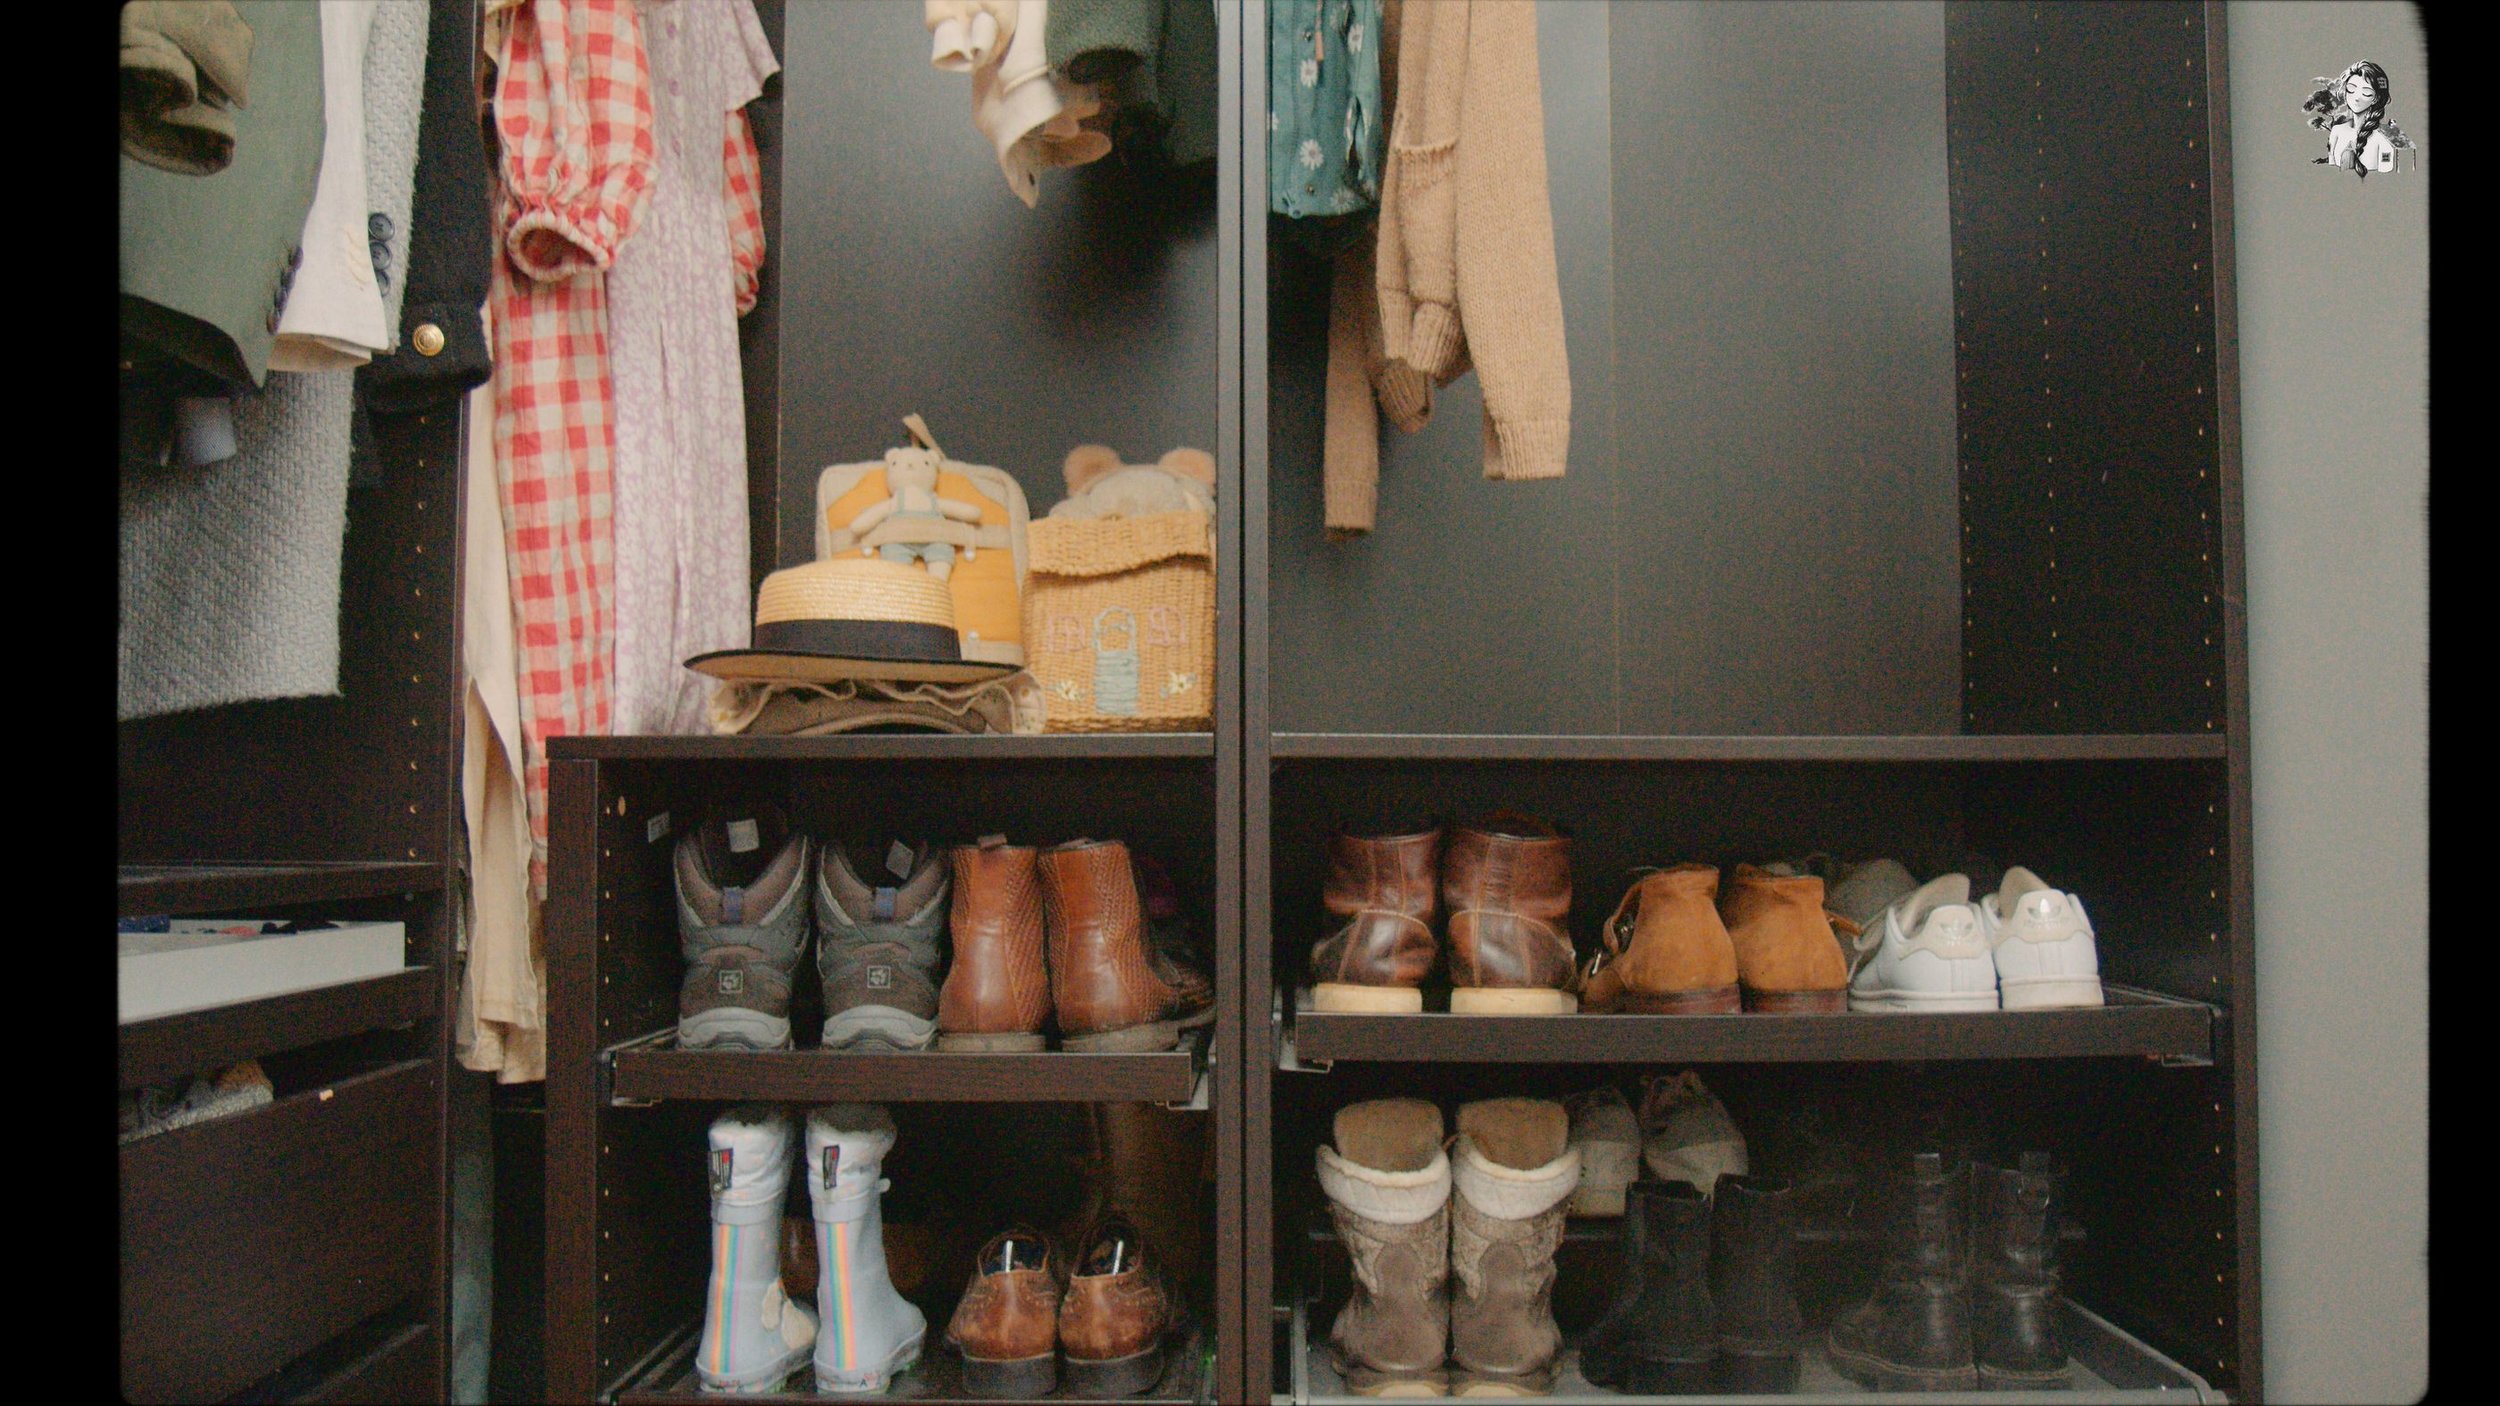 Wadrobe Tour - What's in my Closet - Her86m2_1.63.1.jpg